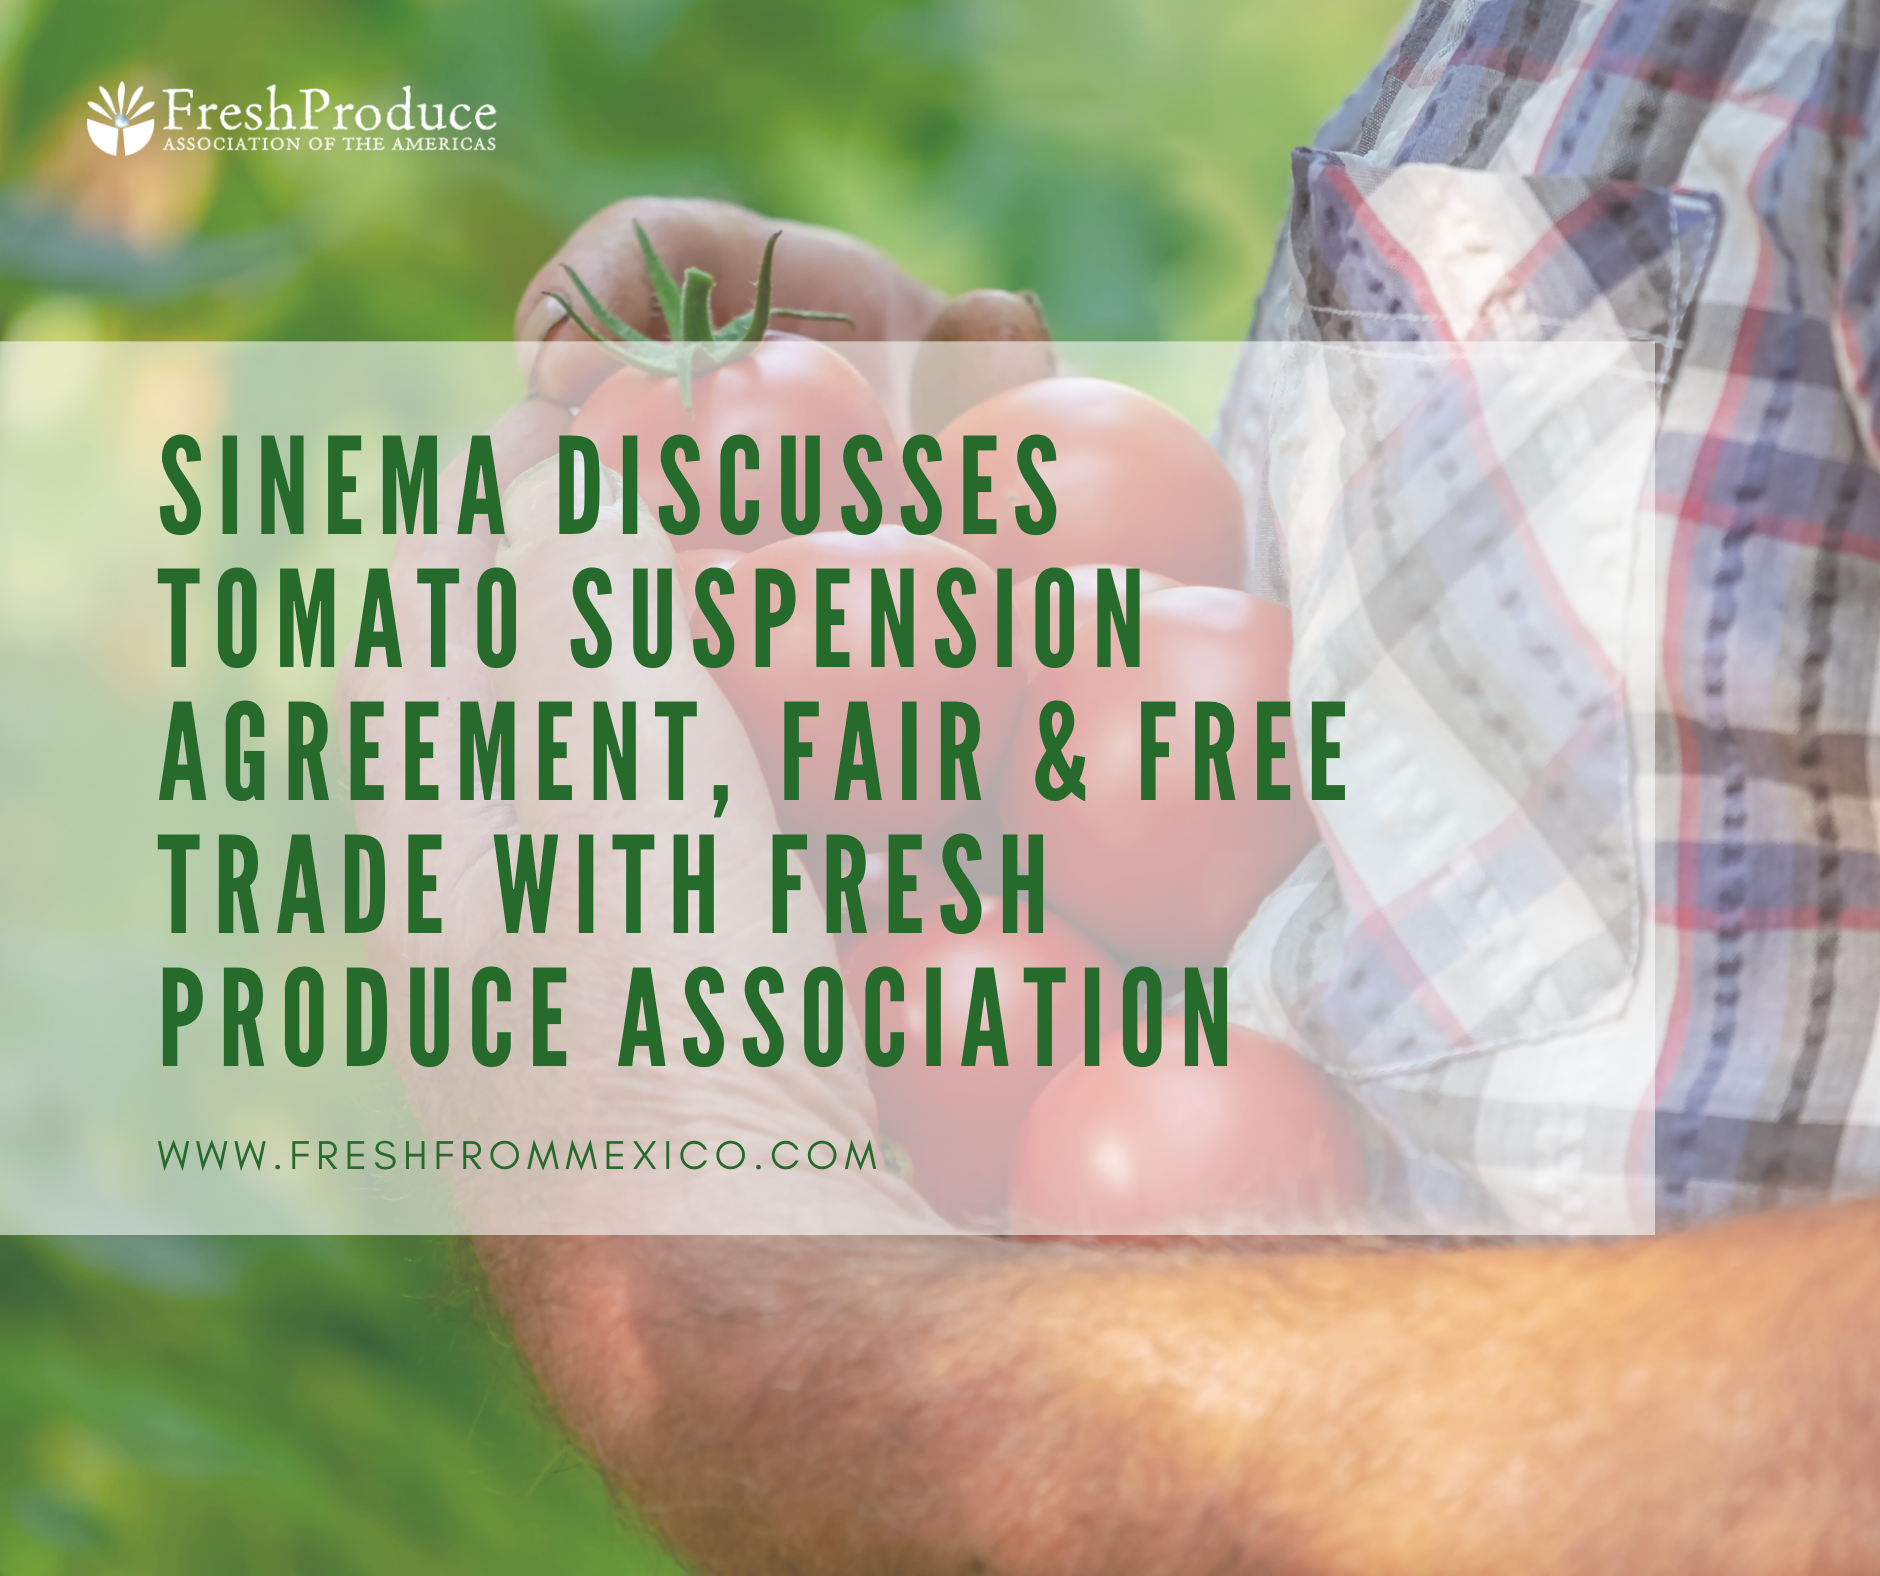 Sinema Discusses Tomato Suspension Agreement, Fair & Free Trade with Fresh Produce Association